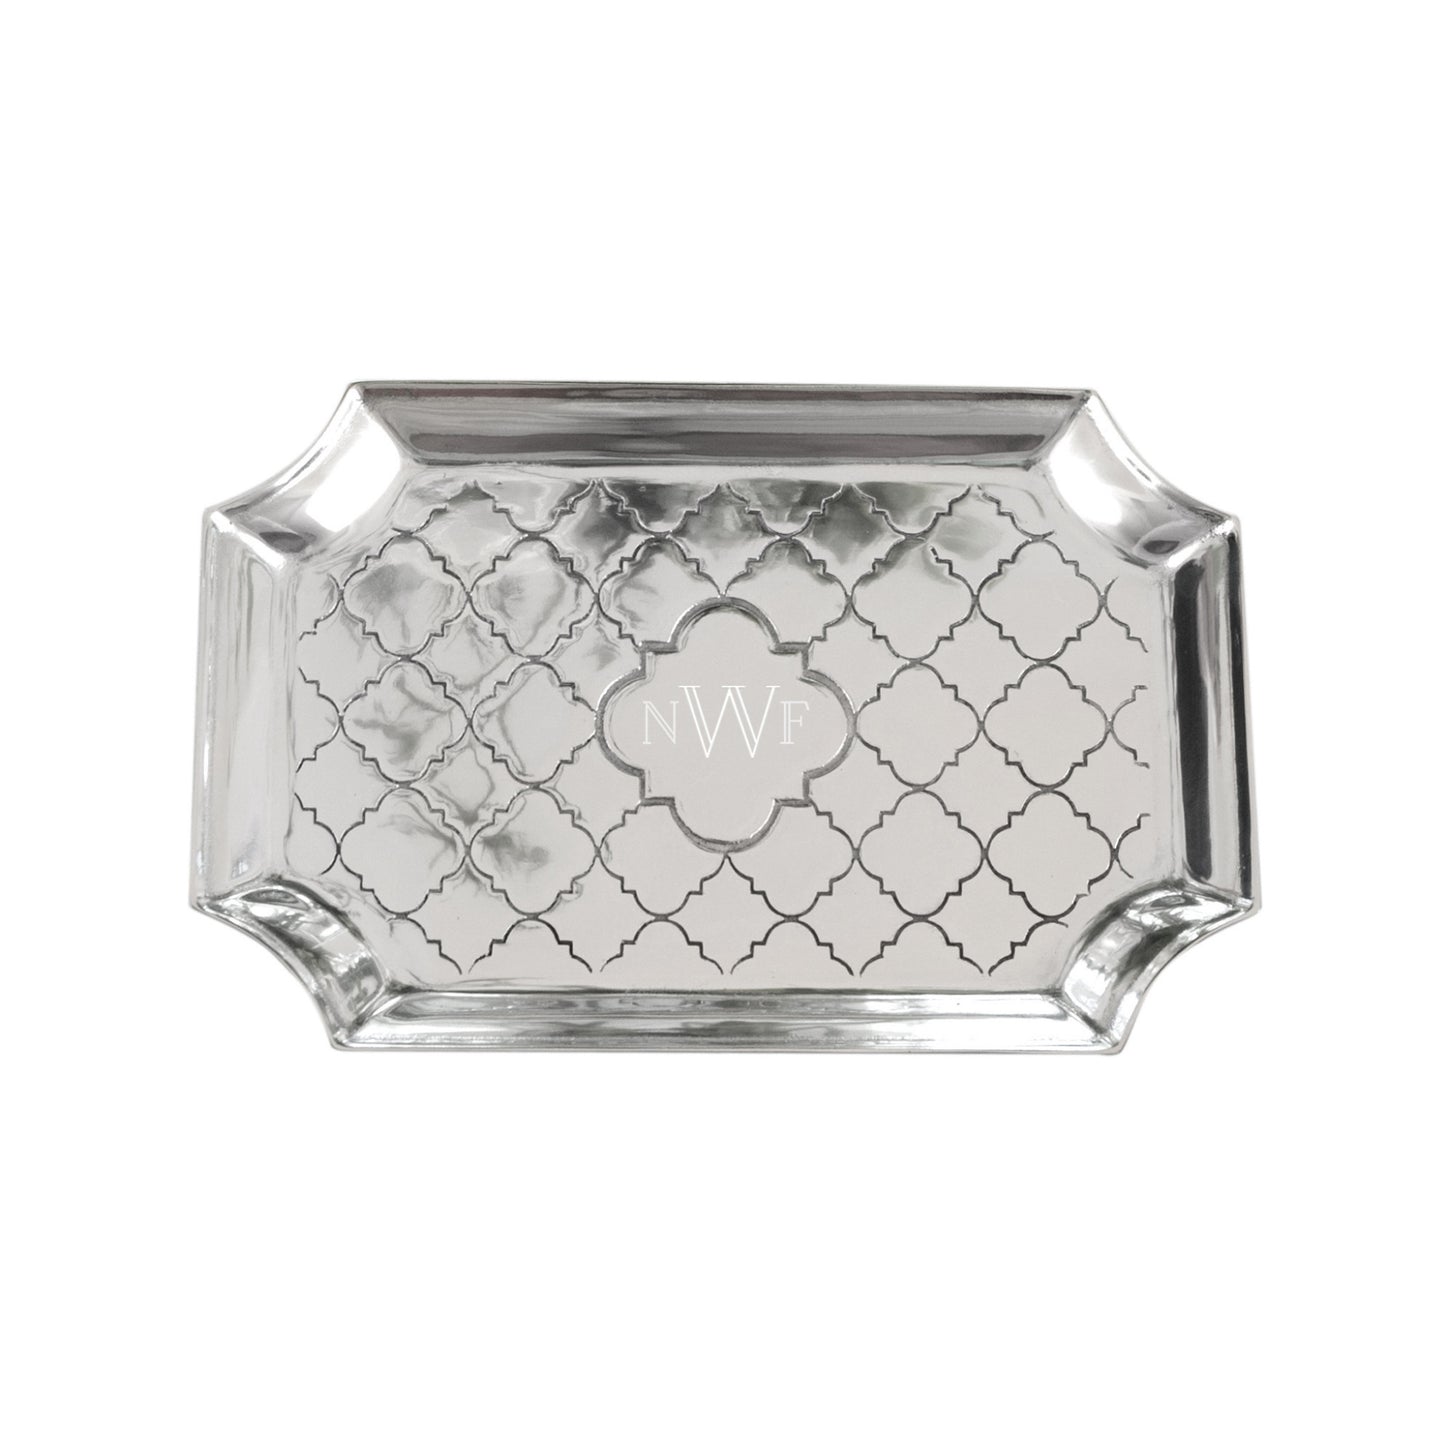 Templeton Silver Edged Vanity Tray that's showing an engraved monogram